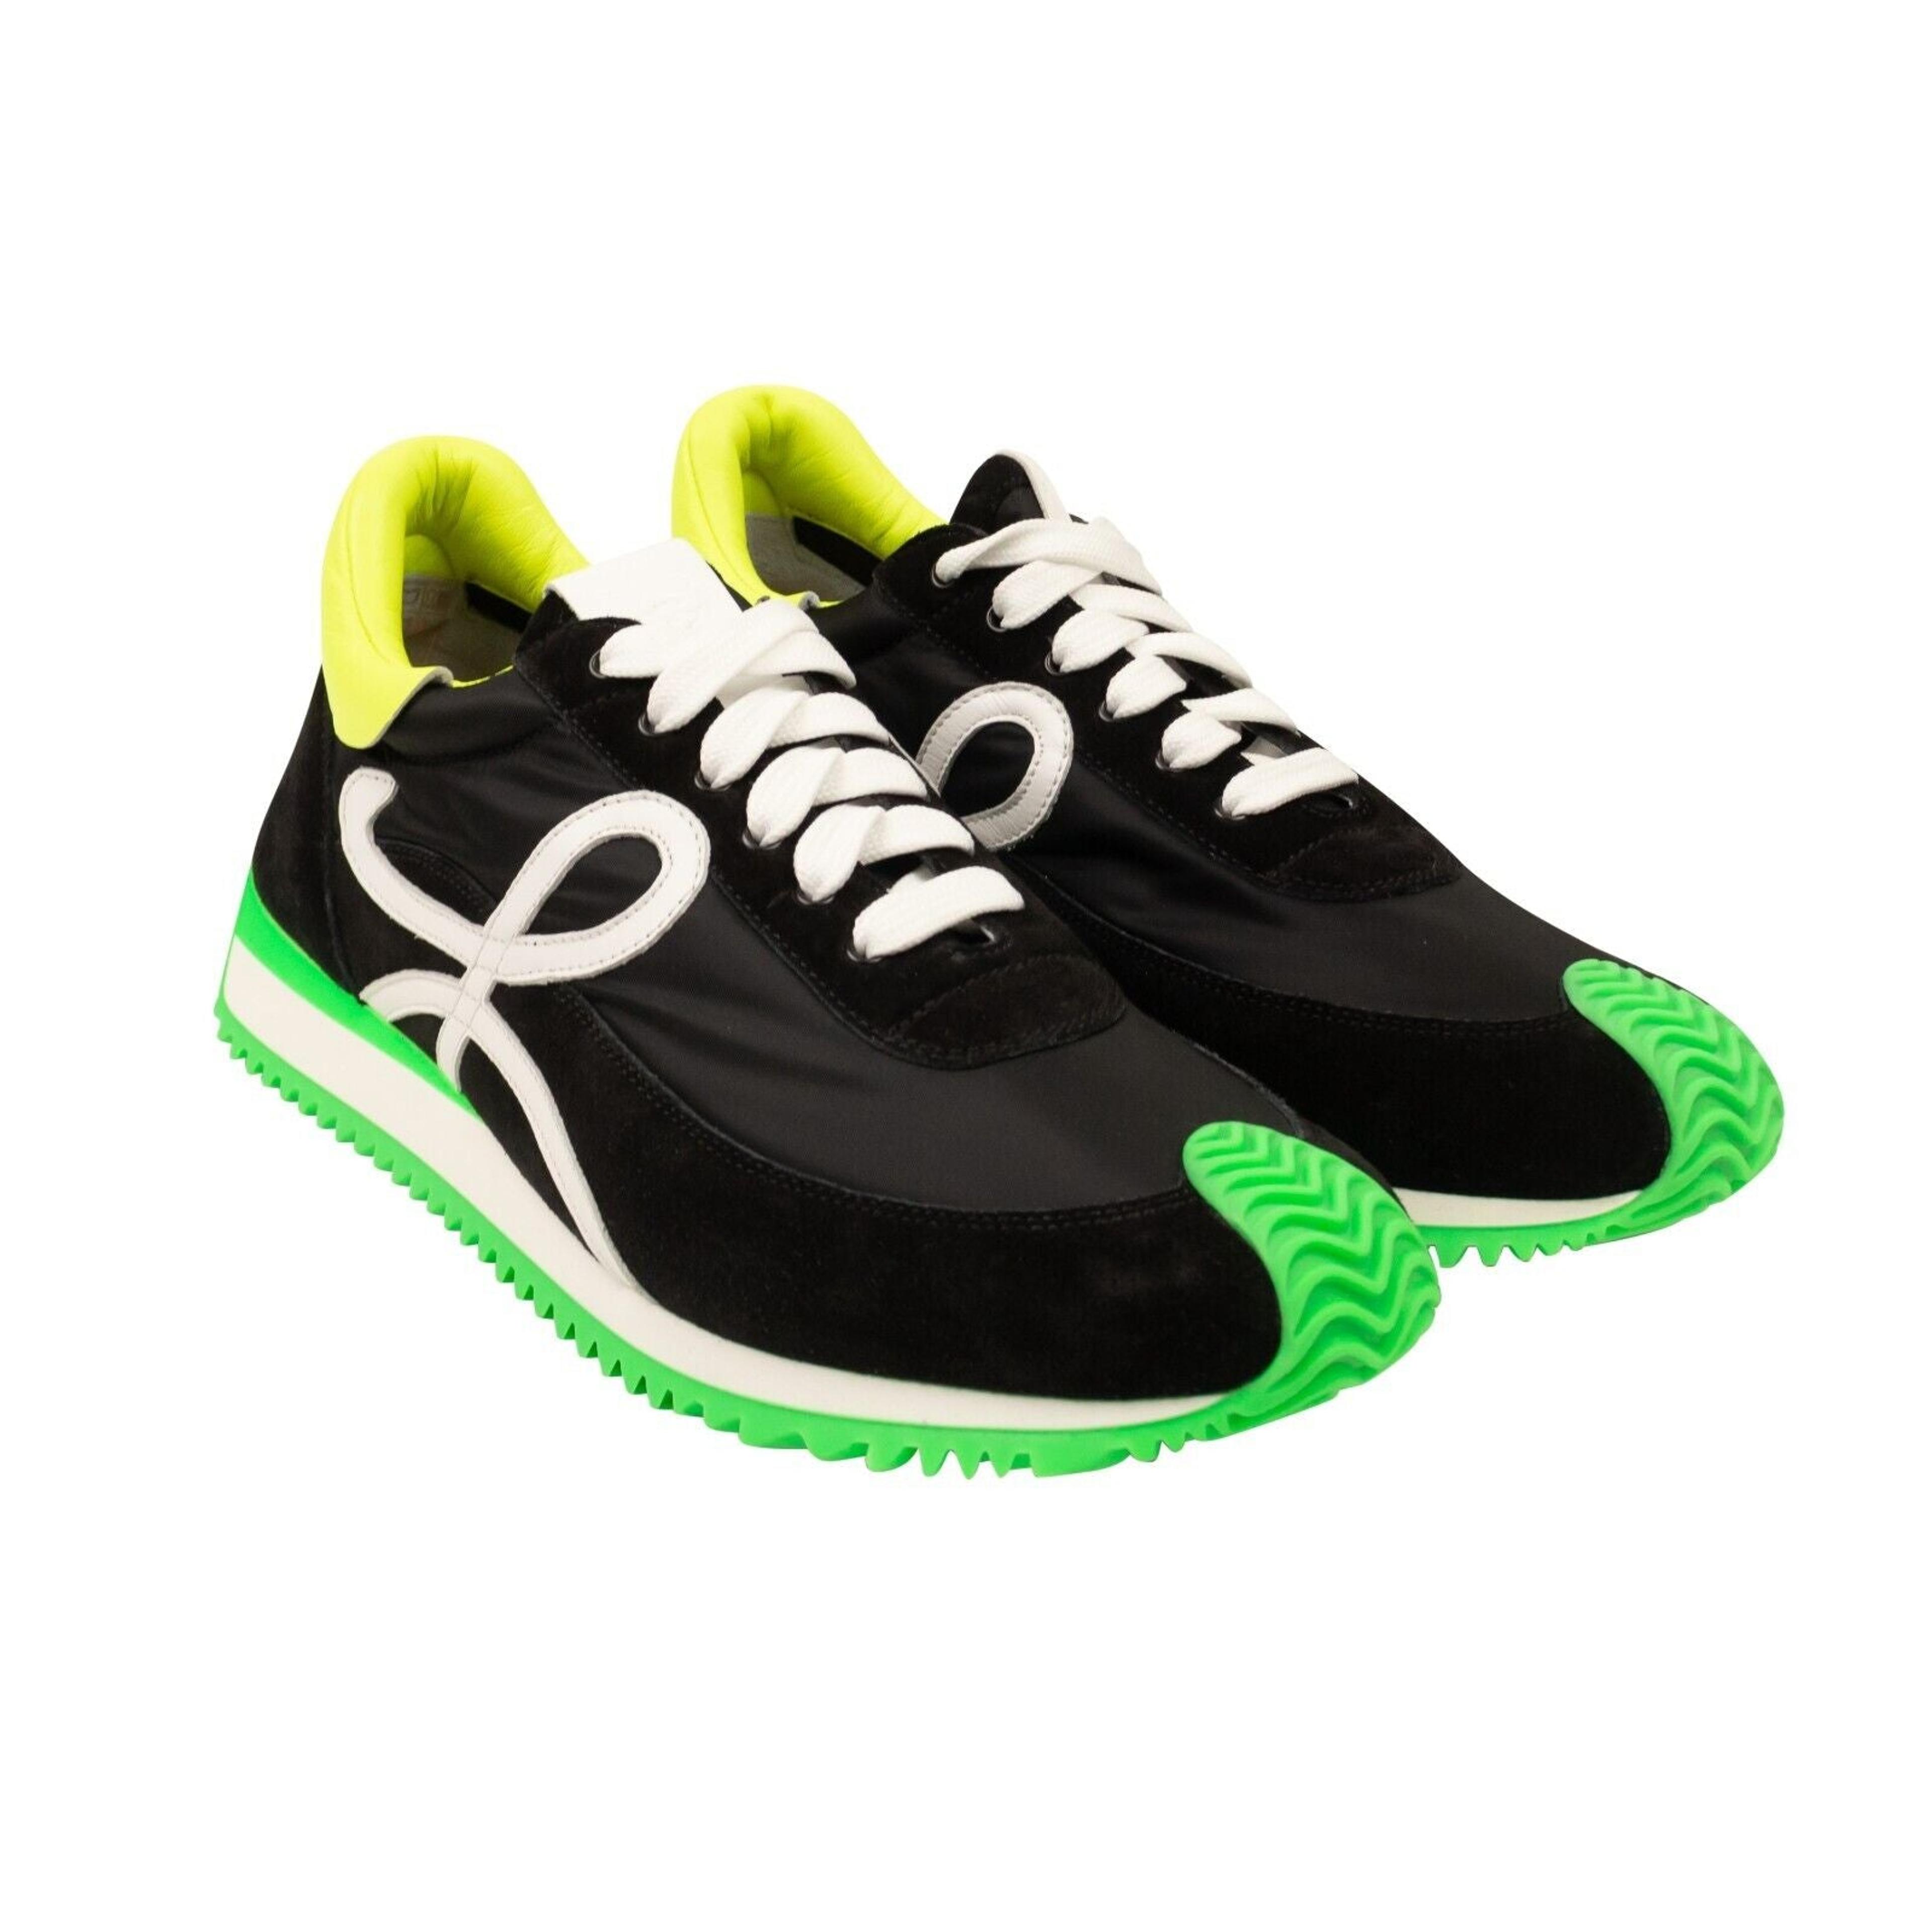 Alternate View 2 of Black And Multi Flow Runner Lace Up Sneakers